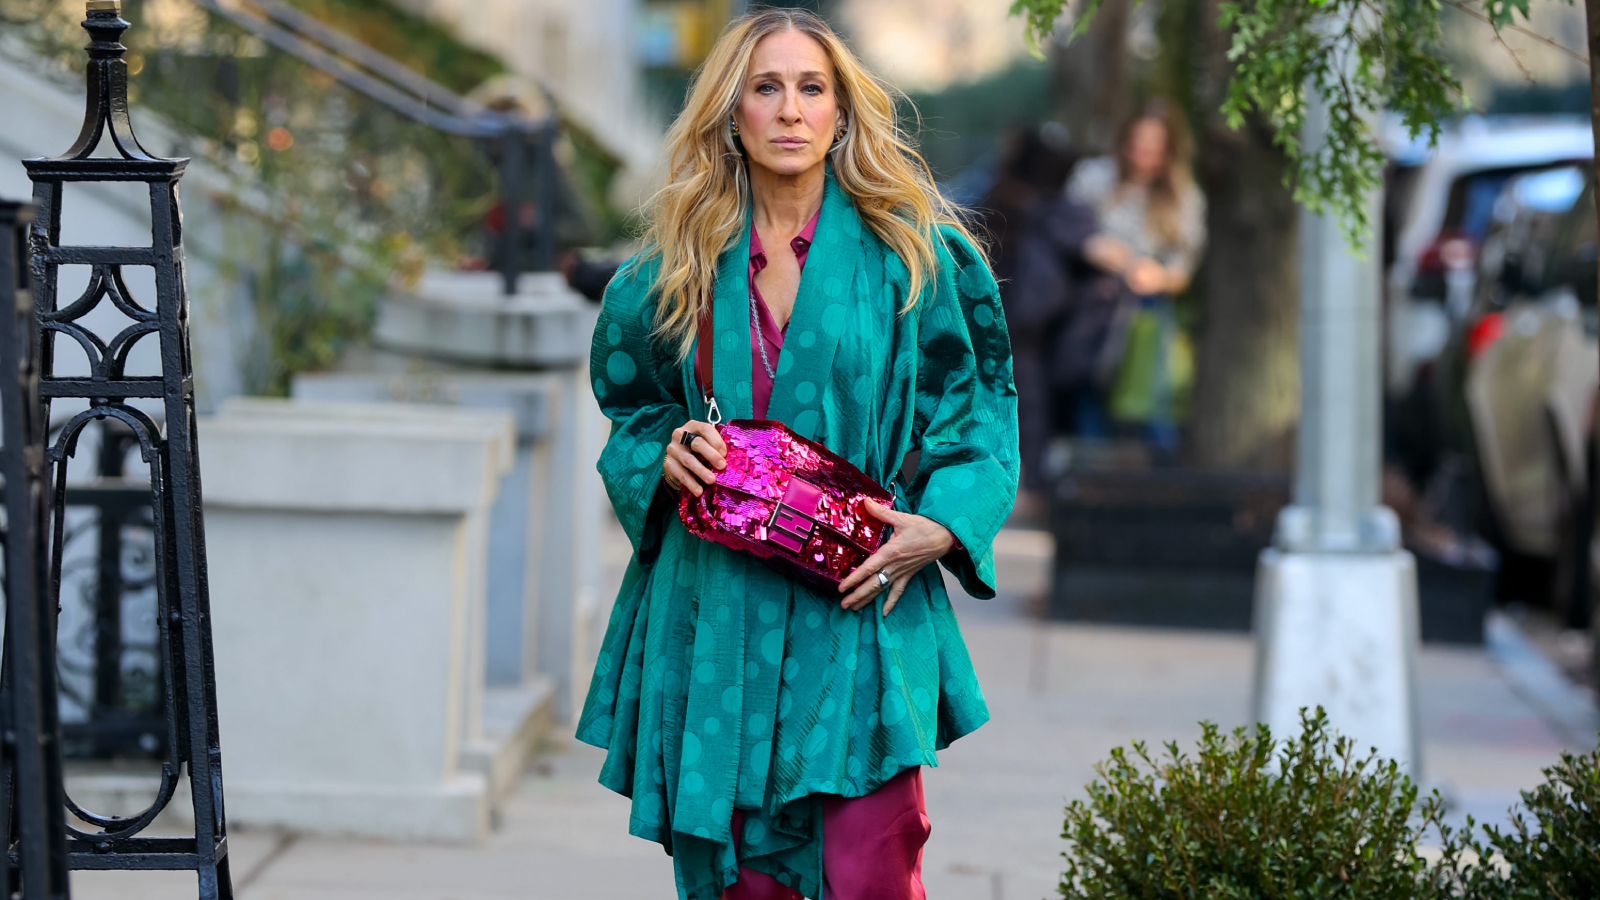 And Just Like That' Season 2: Photos Of Sarah Jessica Parker